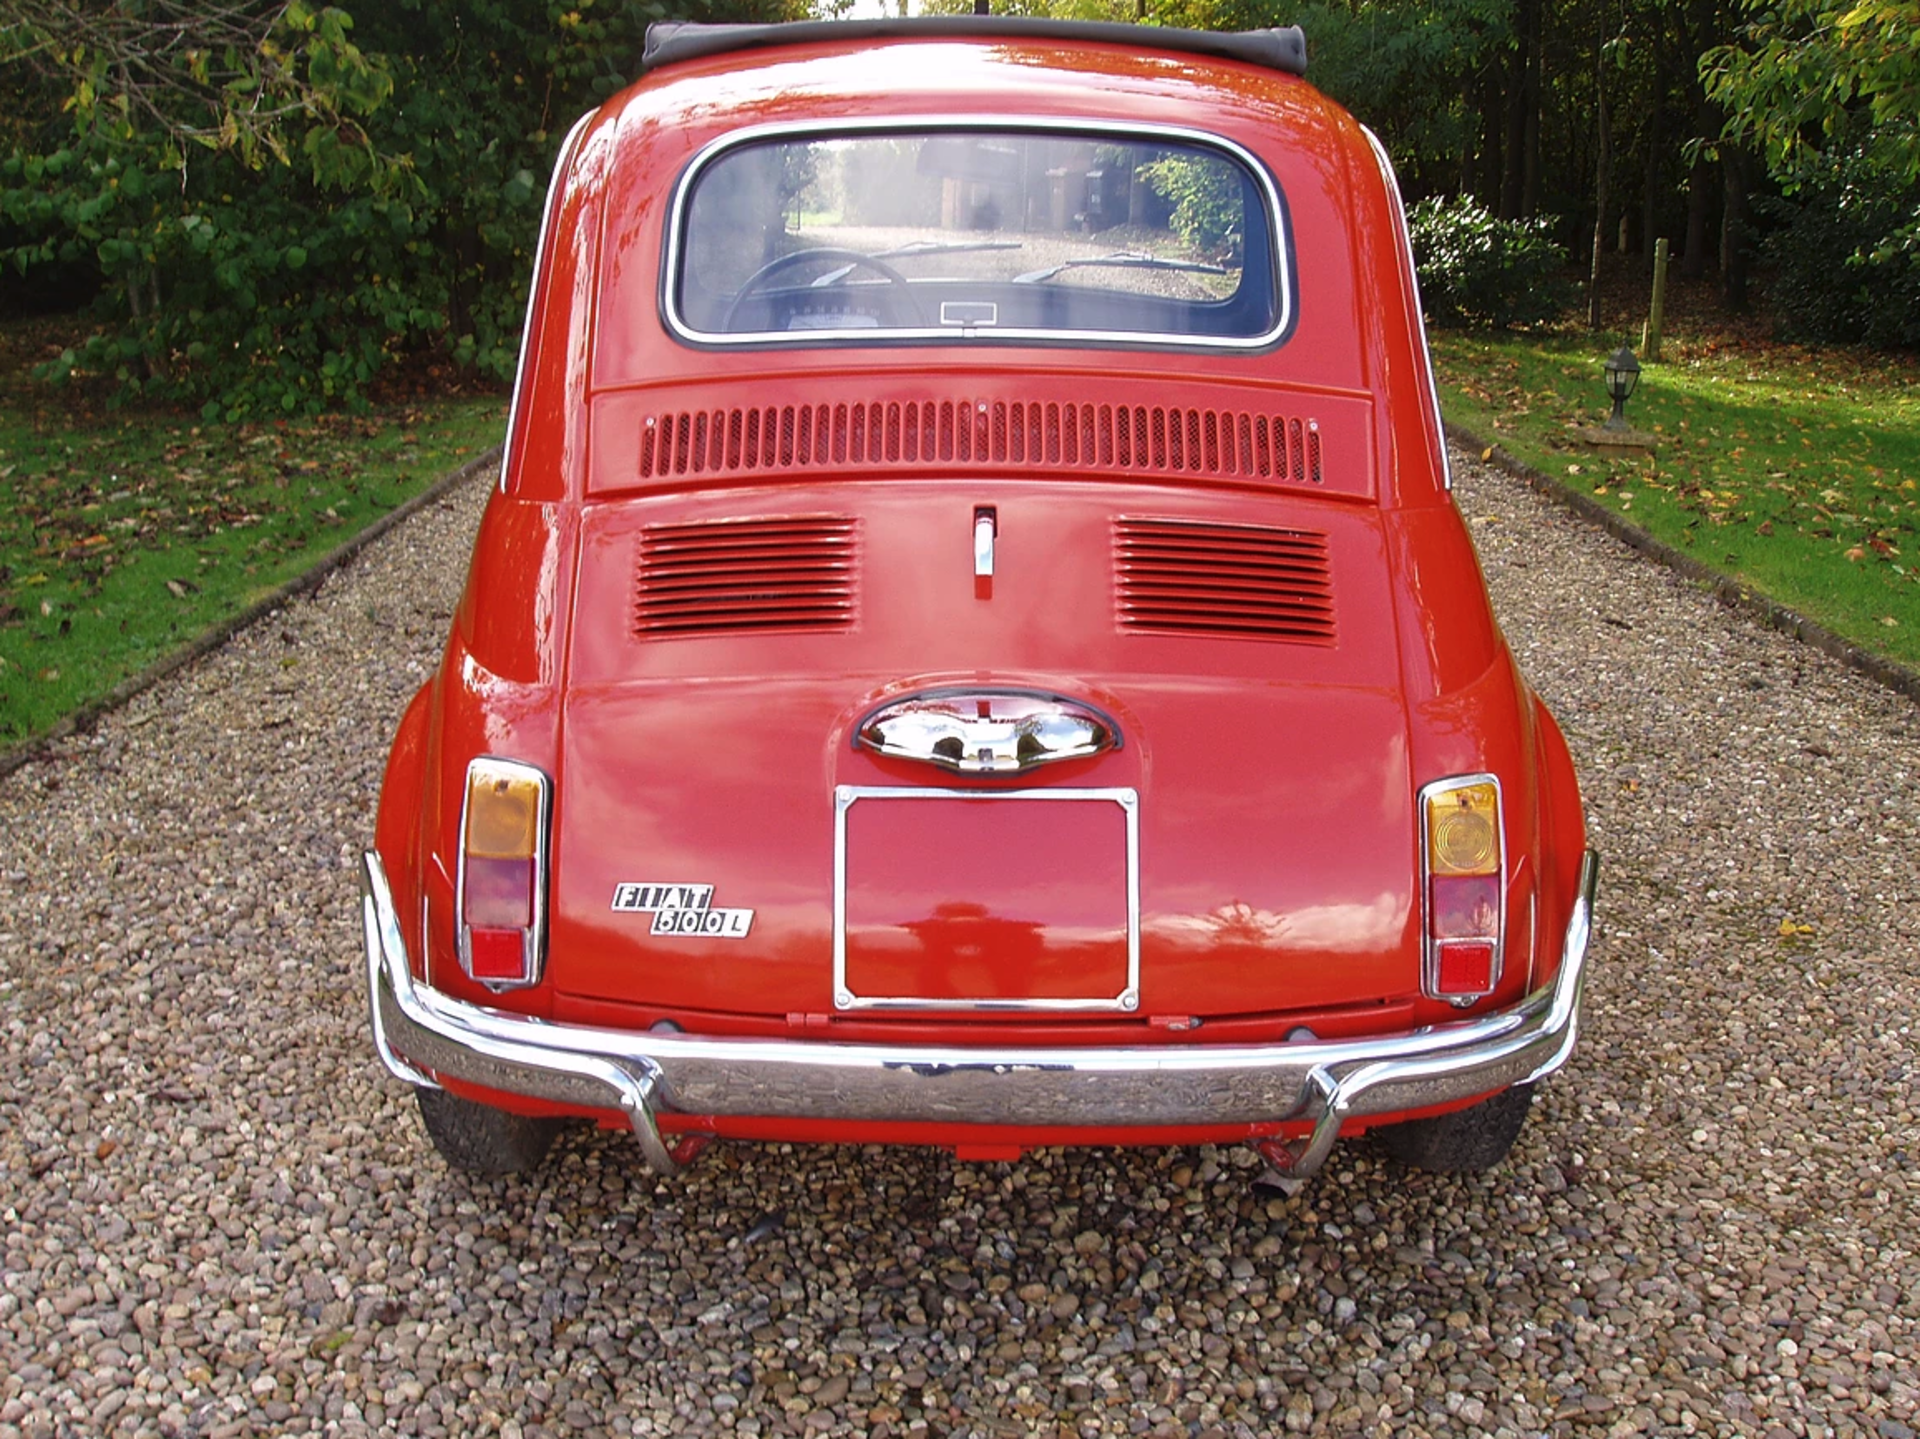 1970 Fiat 500 Lusso - Image 5 of 14